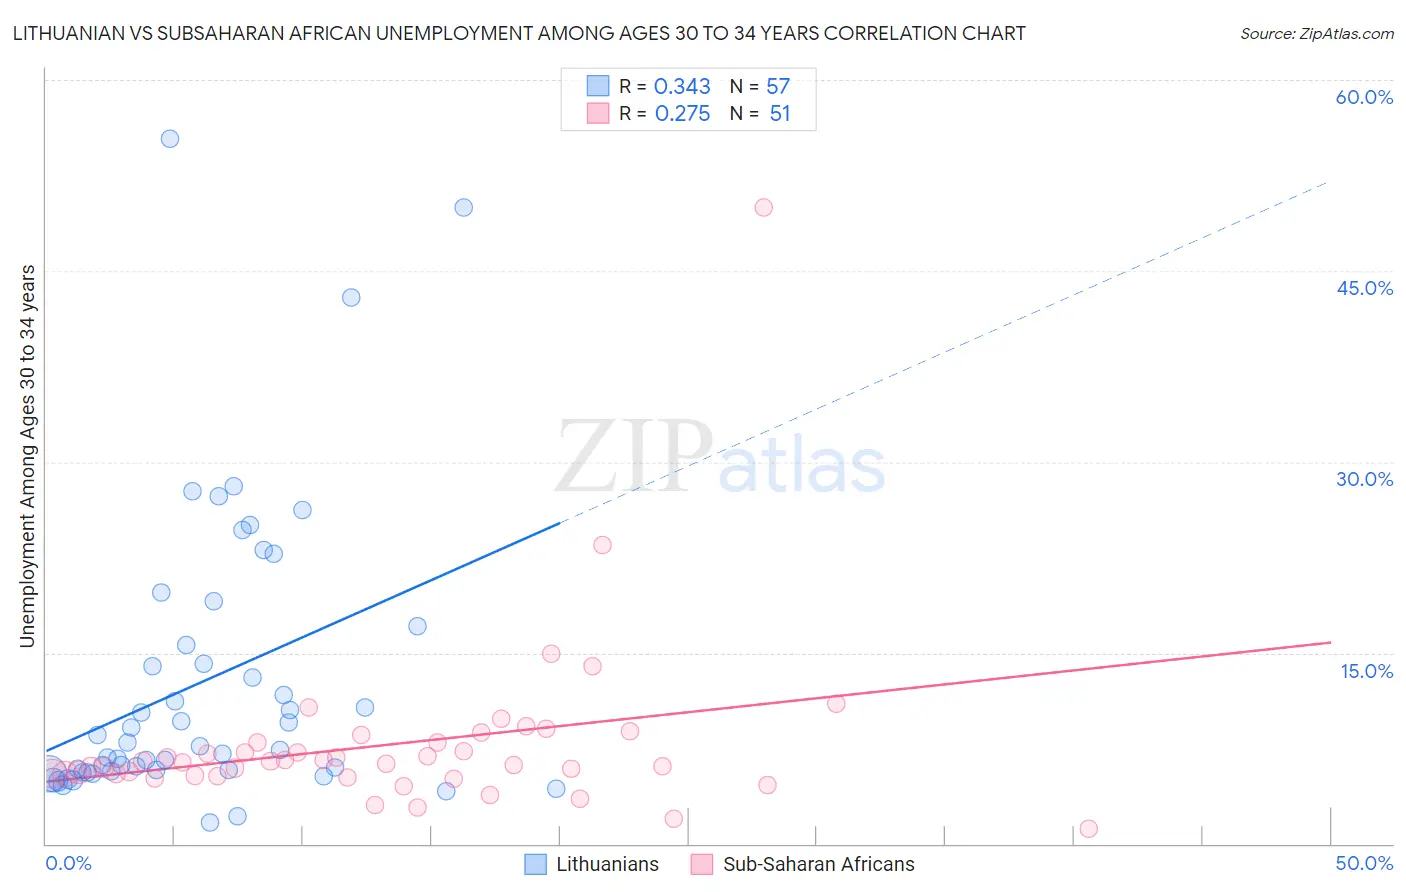 Lithuanian vs Subsaharan African Unemployment Among Ages 30 to 34 years